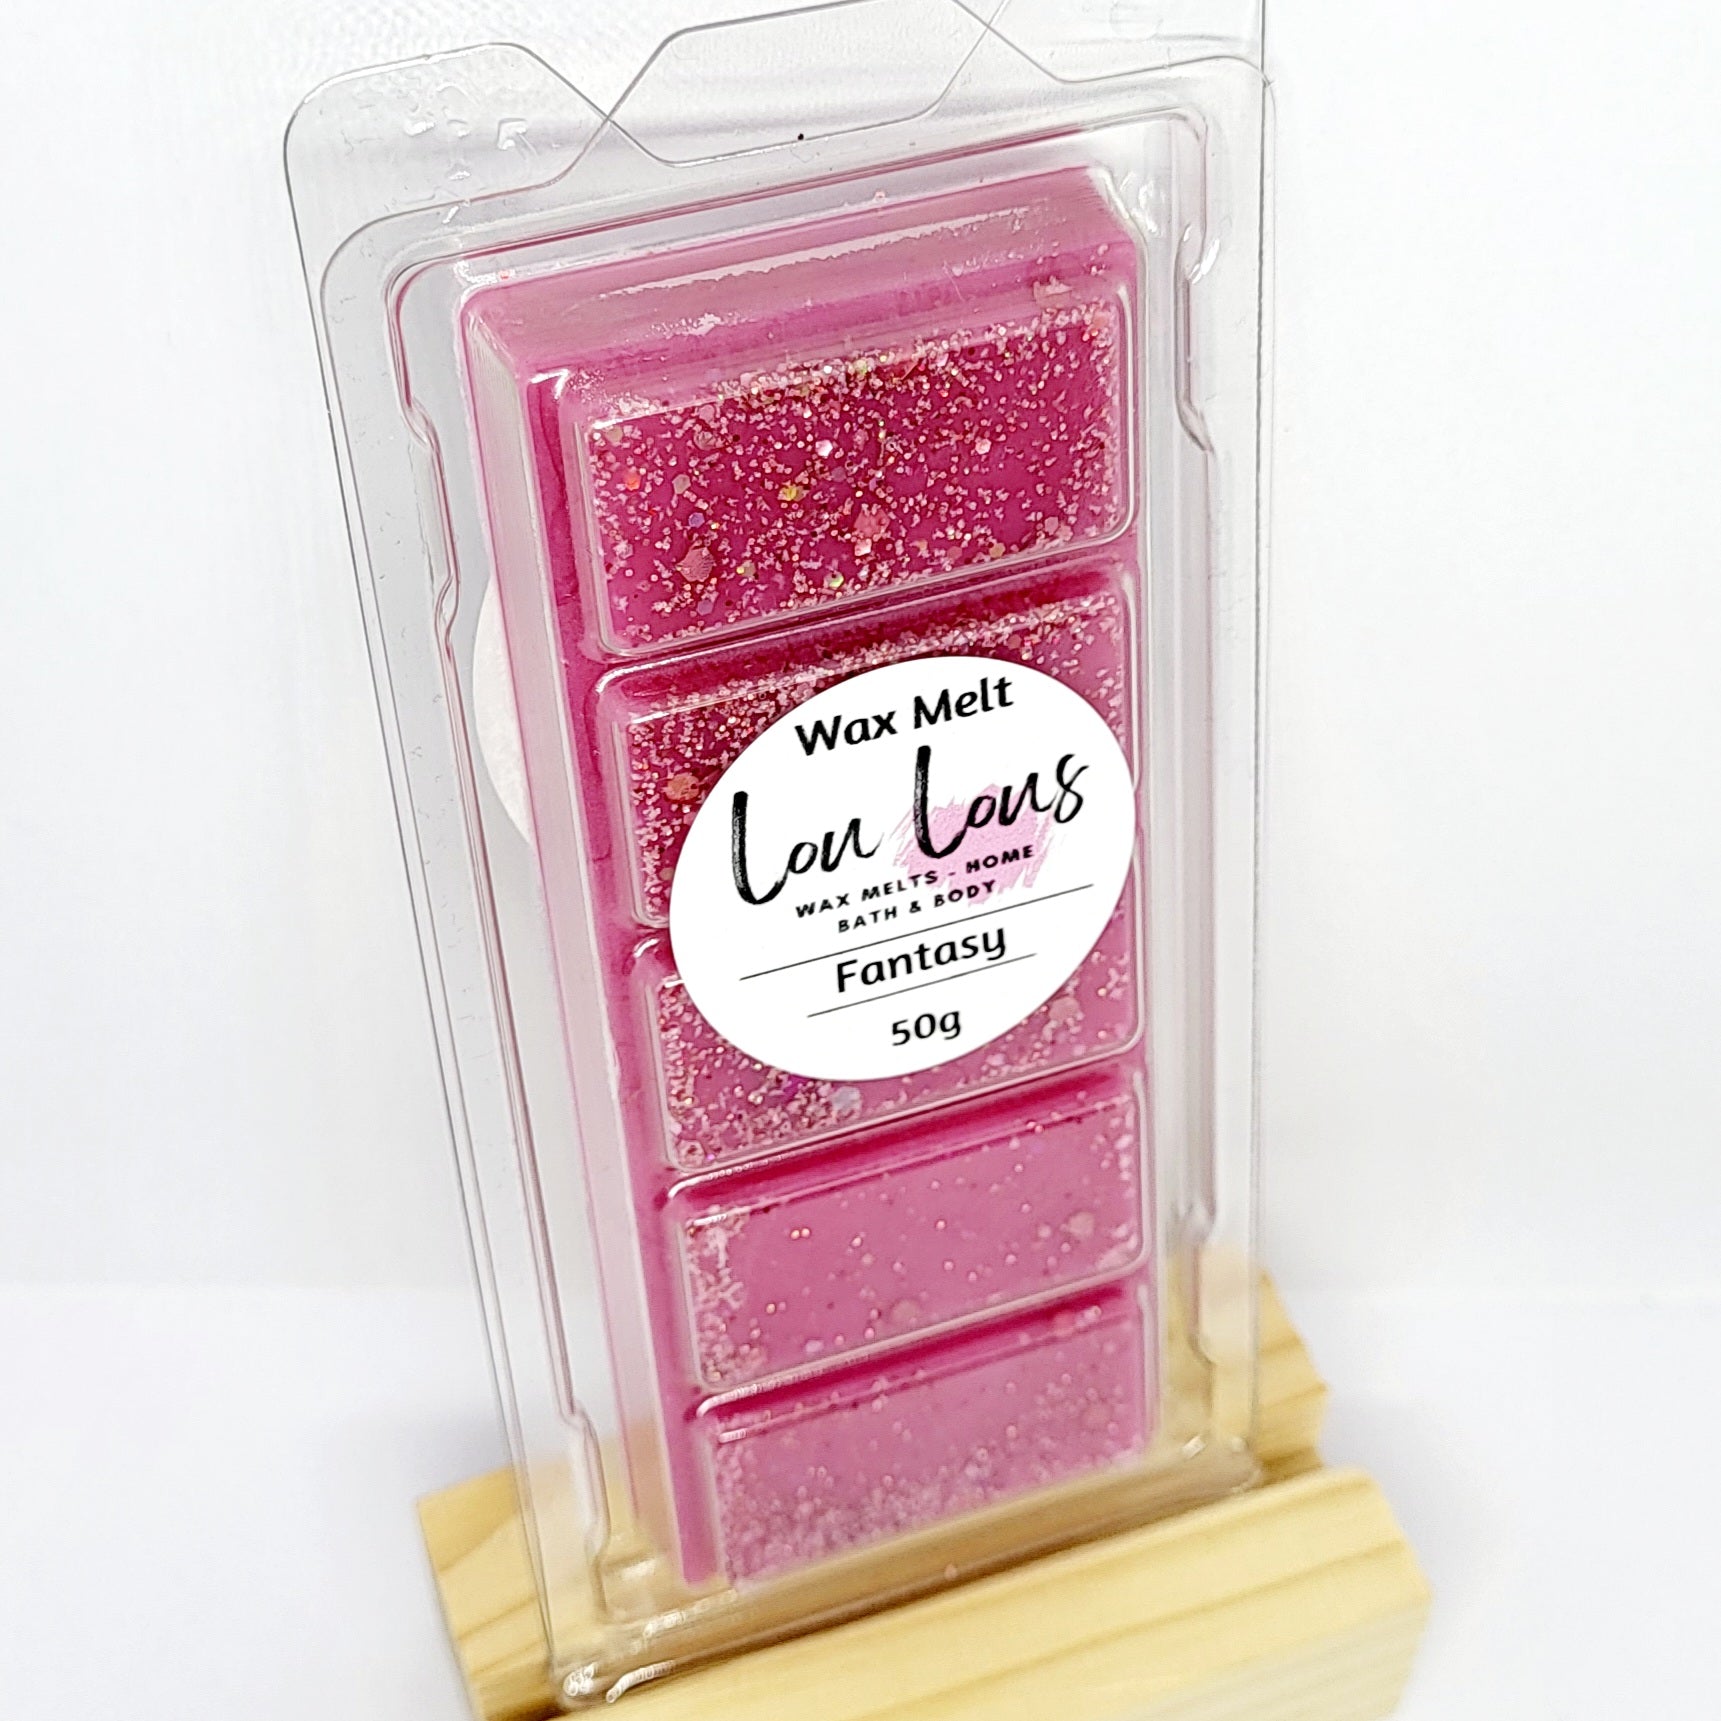 Wax melt snap bar scented in fantasy